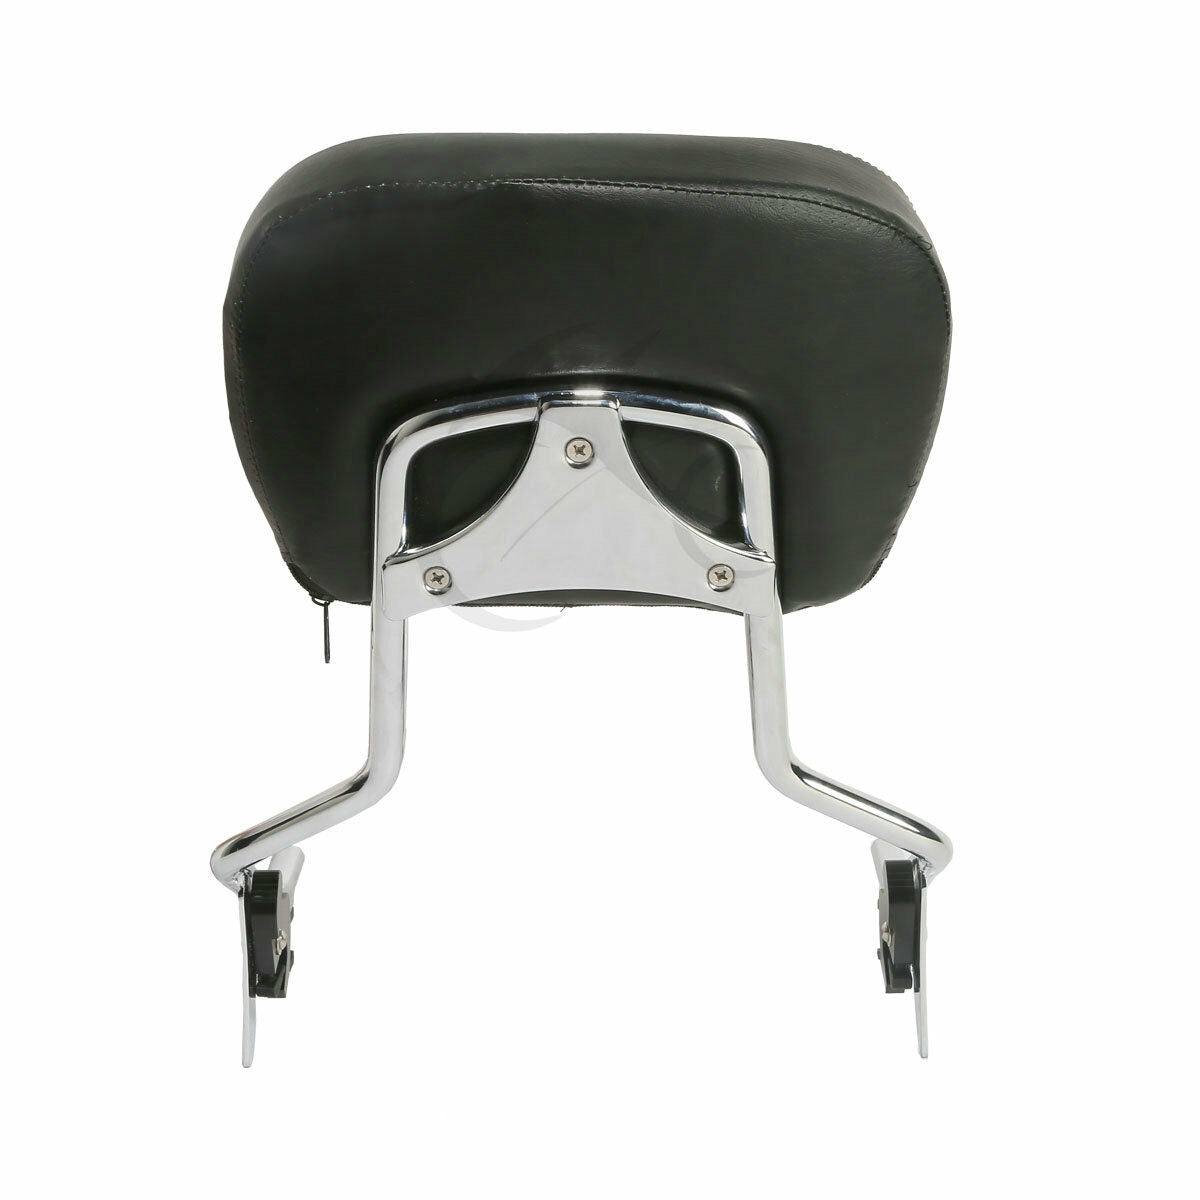 Sissy Bar Passenger Backrest W/ Pad Fit For Harley Street Glide Road Glide 09-21 - Moto Life Products